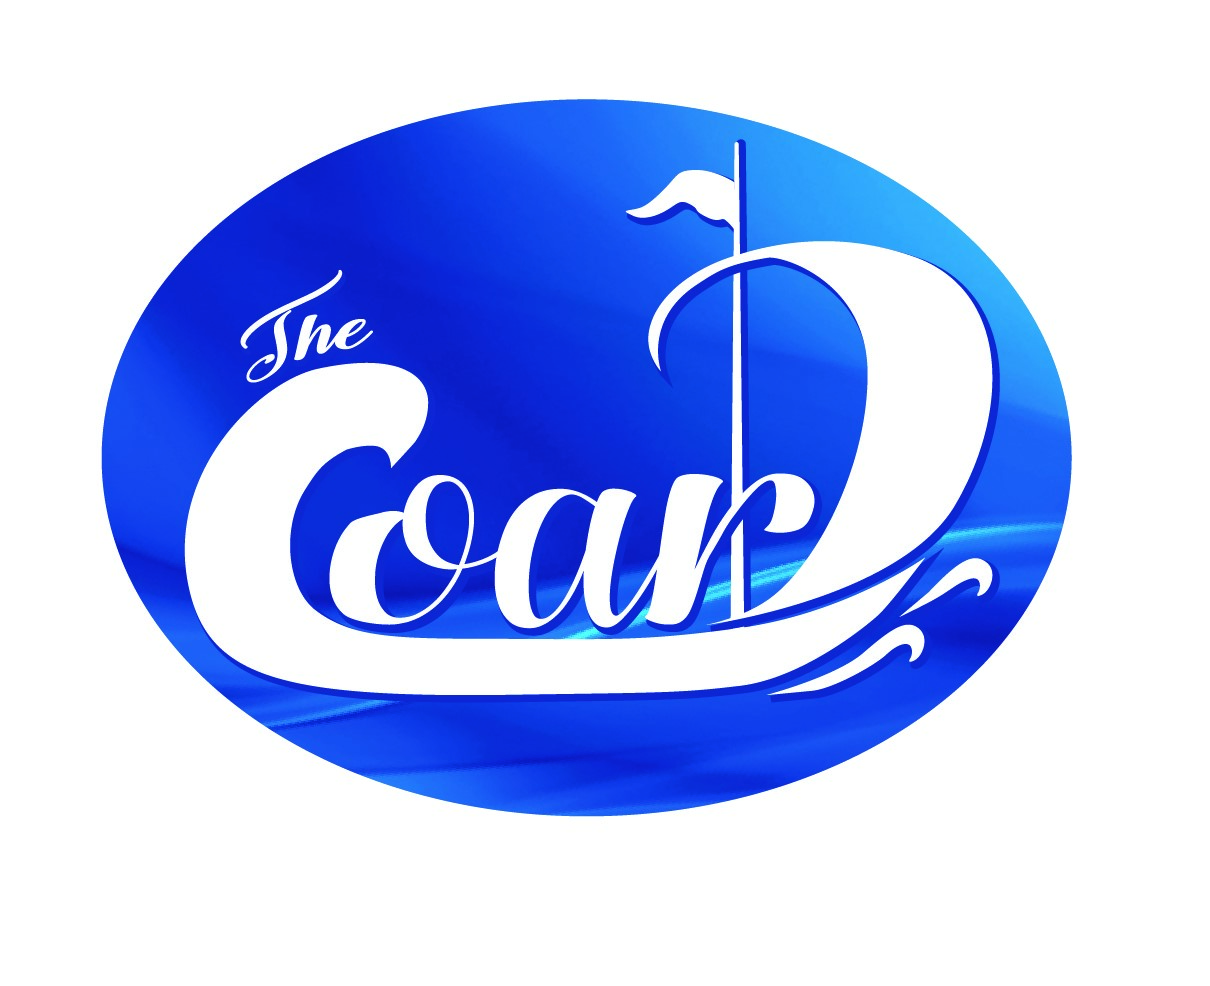 The COARD is on Facebook!